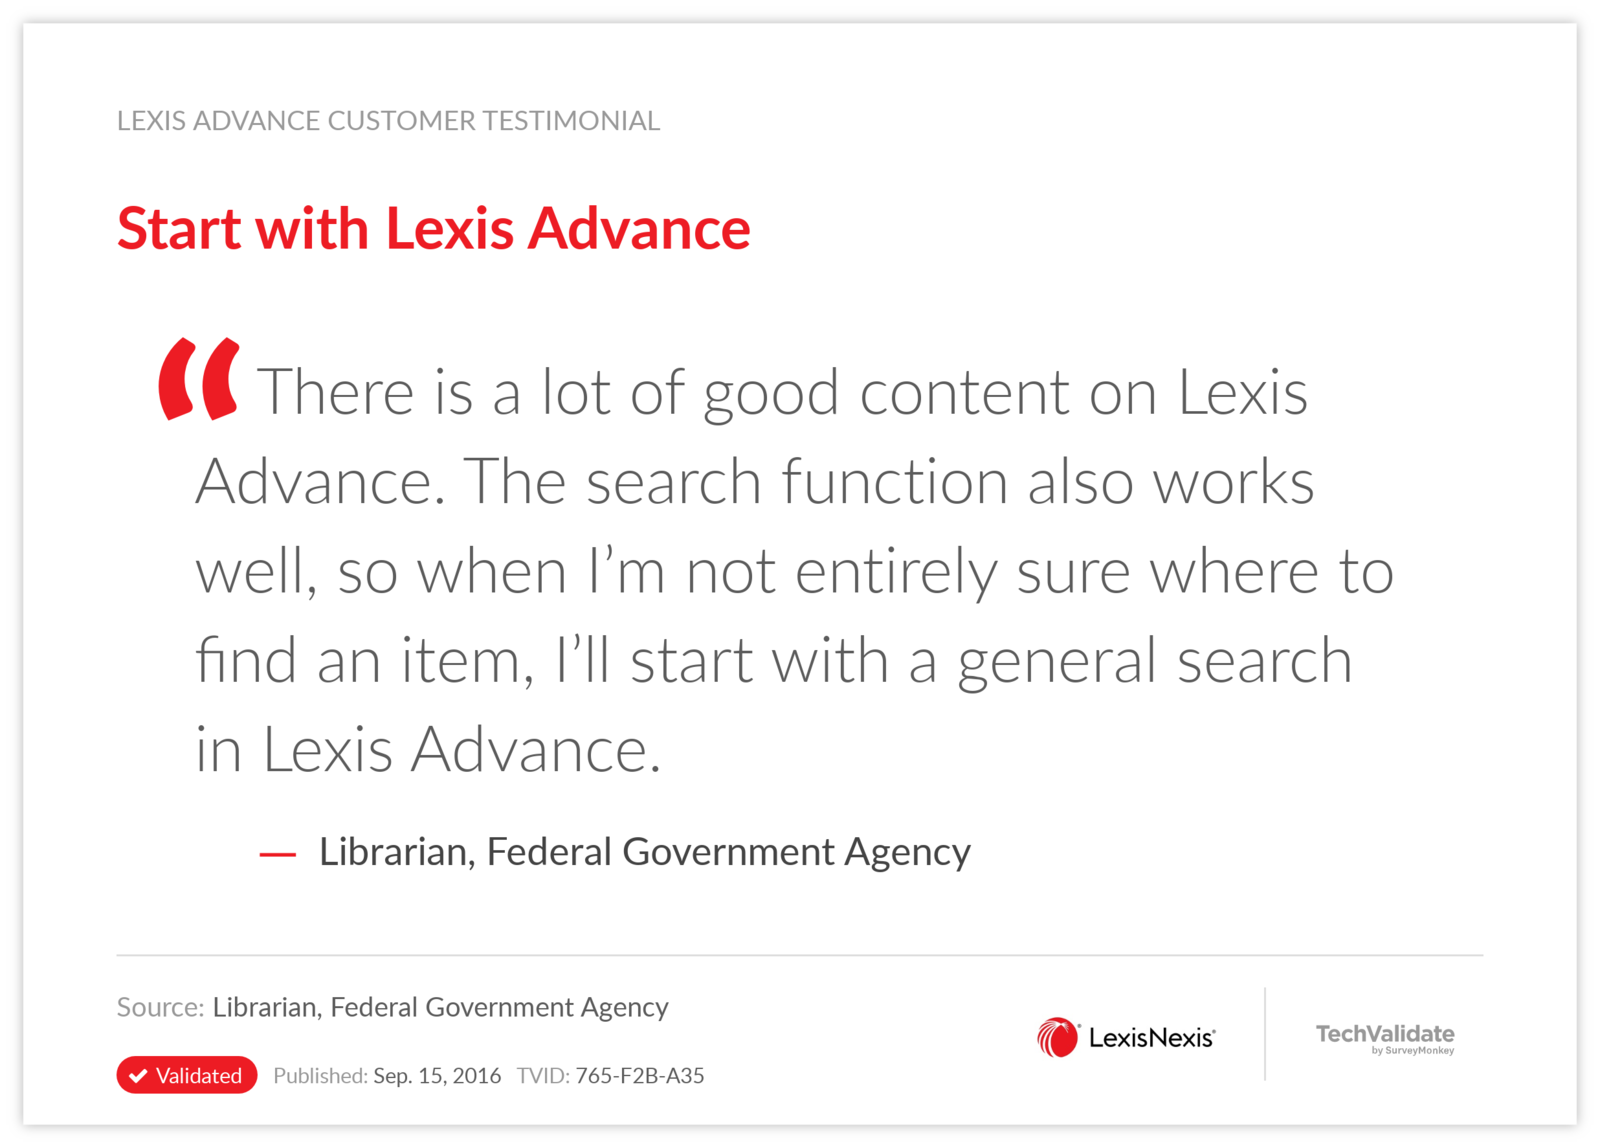 Start with Lexis Advance